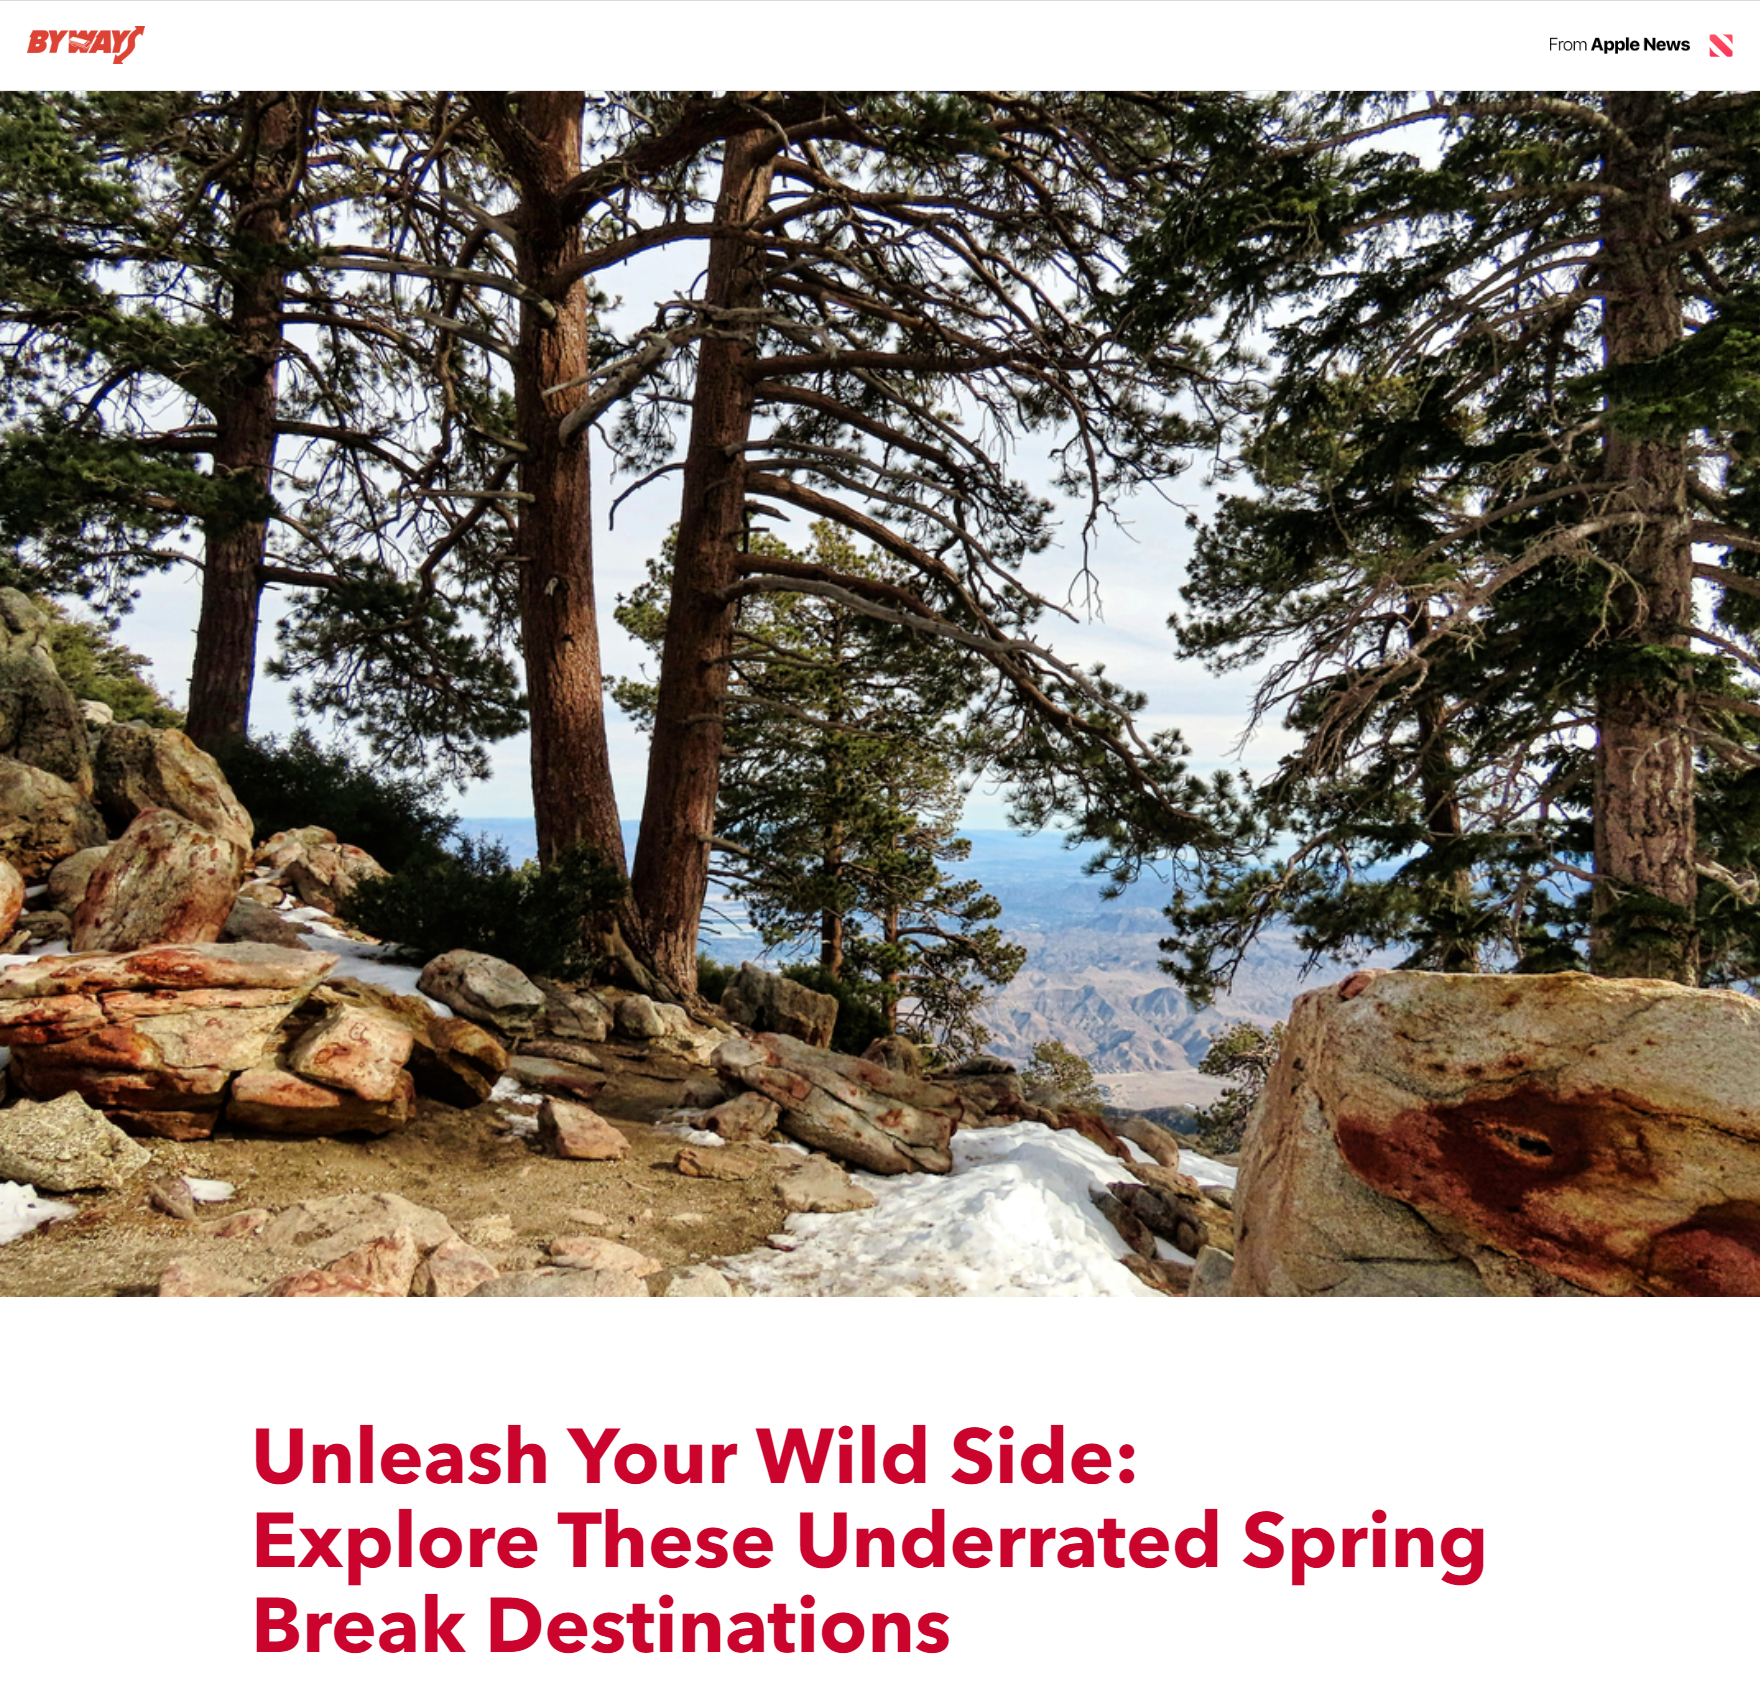 Whimstay's article for Byways Magazine explores: Avoid the crowds at these 10 outdoorsy spots perfect for adventurous souls. As identified by travel company Whimstay. 